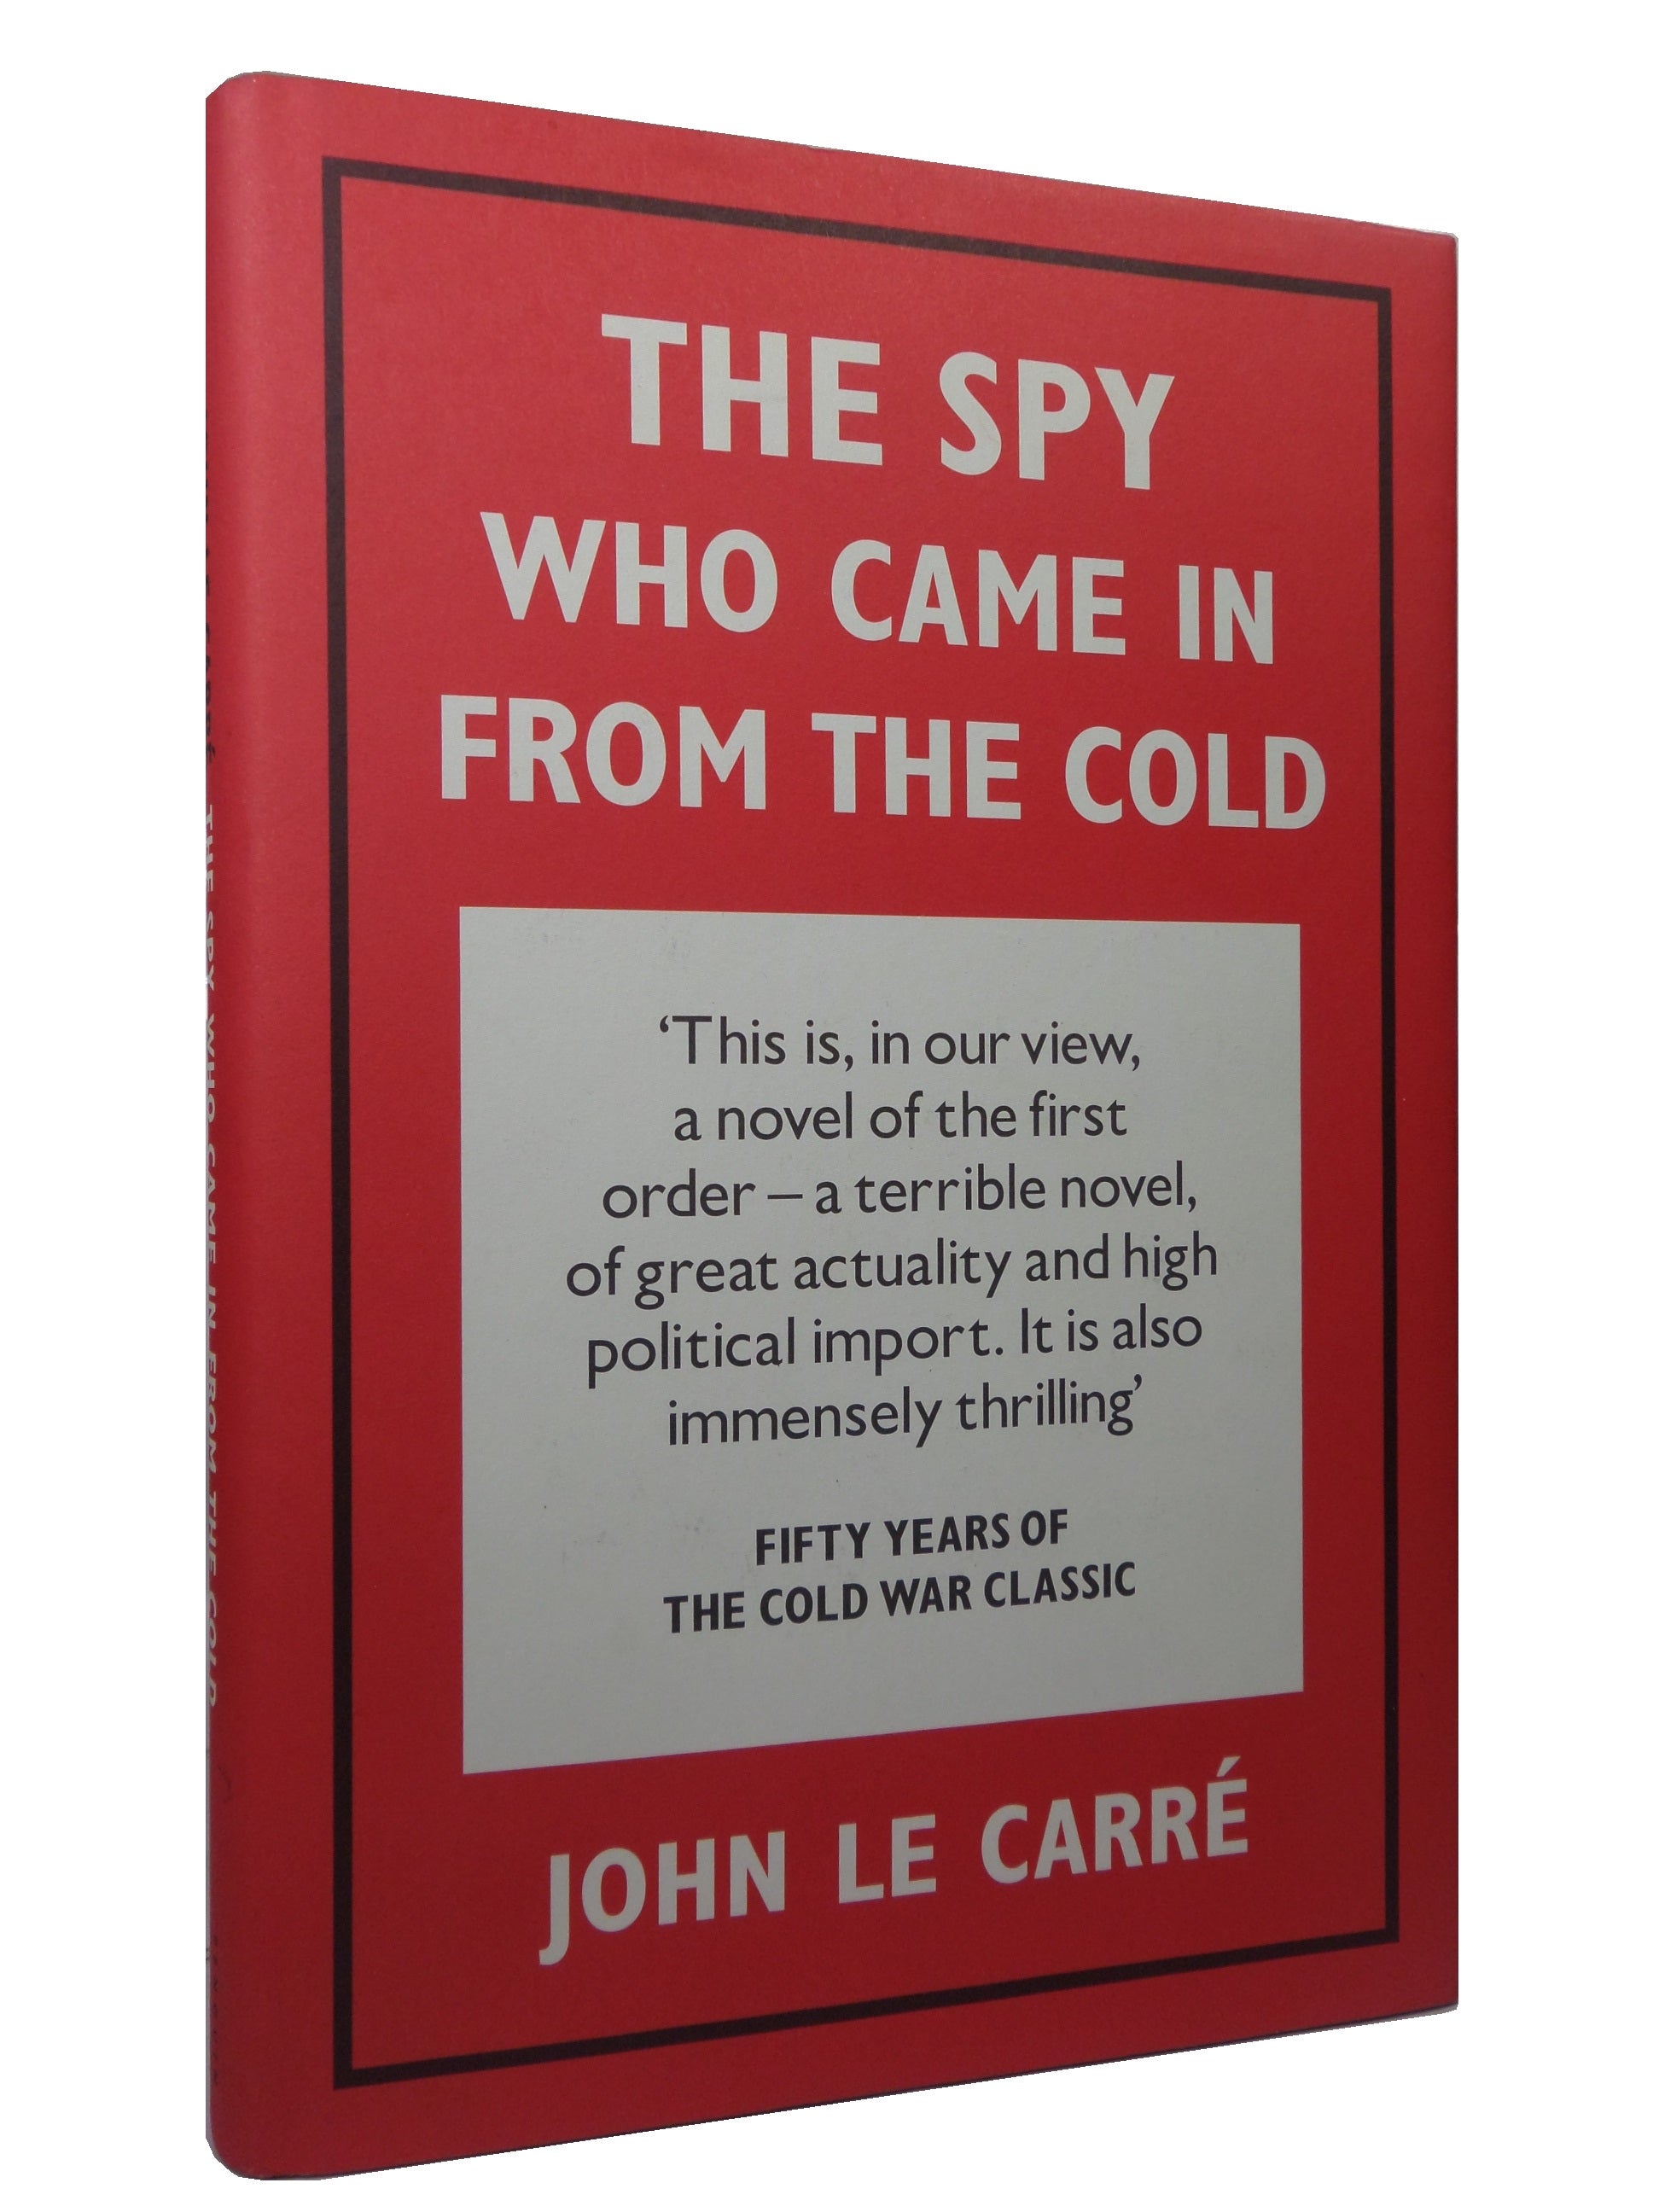 THE SPY WHO CAME IN FROM THE COLD 2013 JOHN LE CARRE SIGNED 50TH ANNIVERSARY EDITION